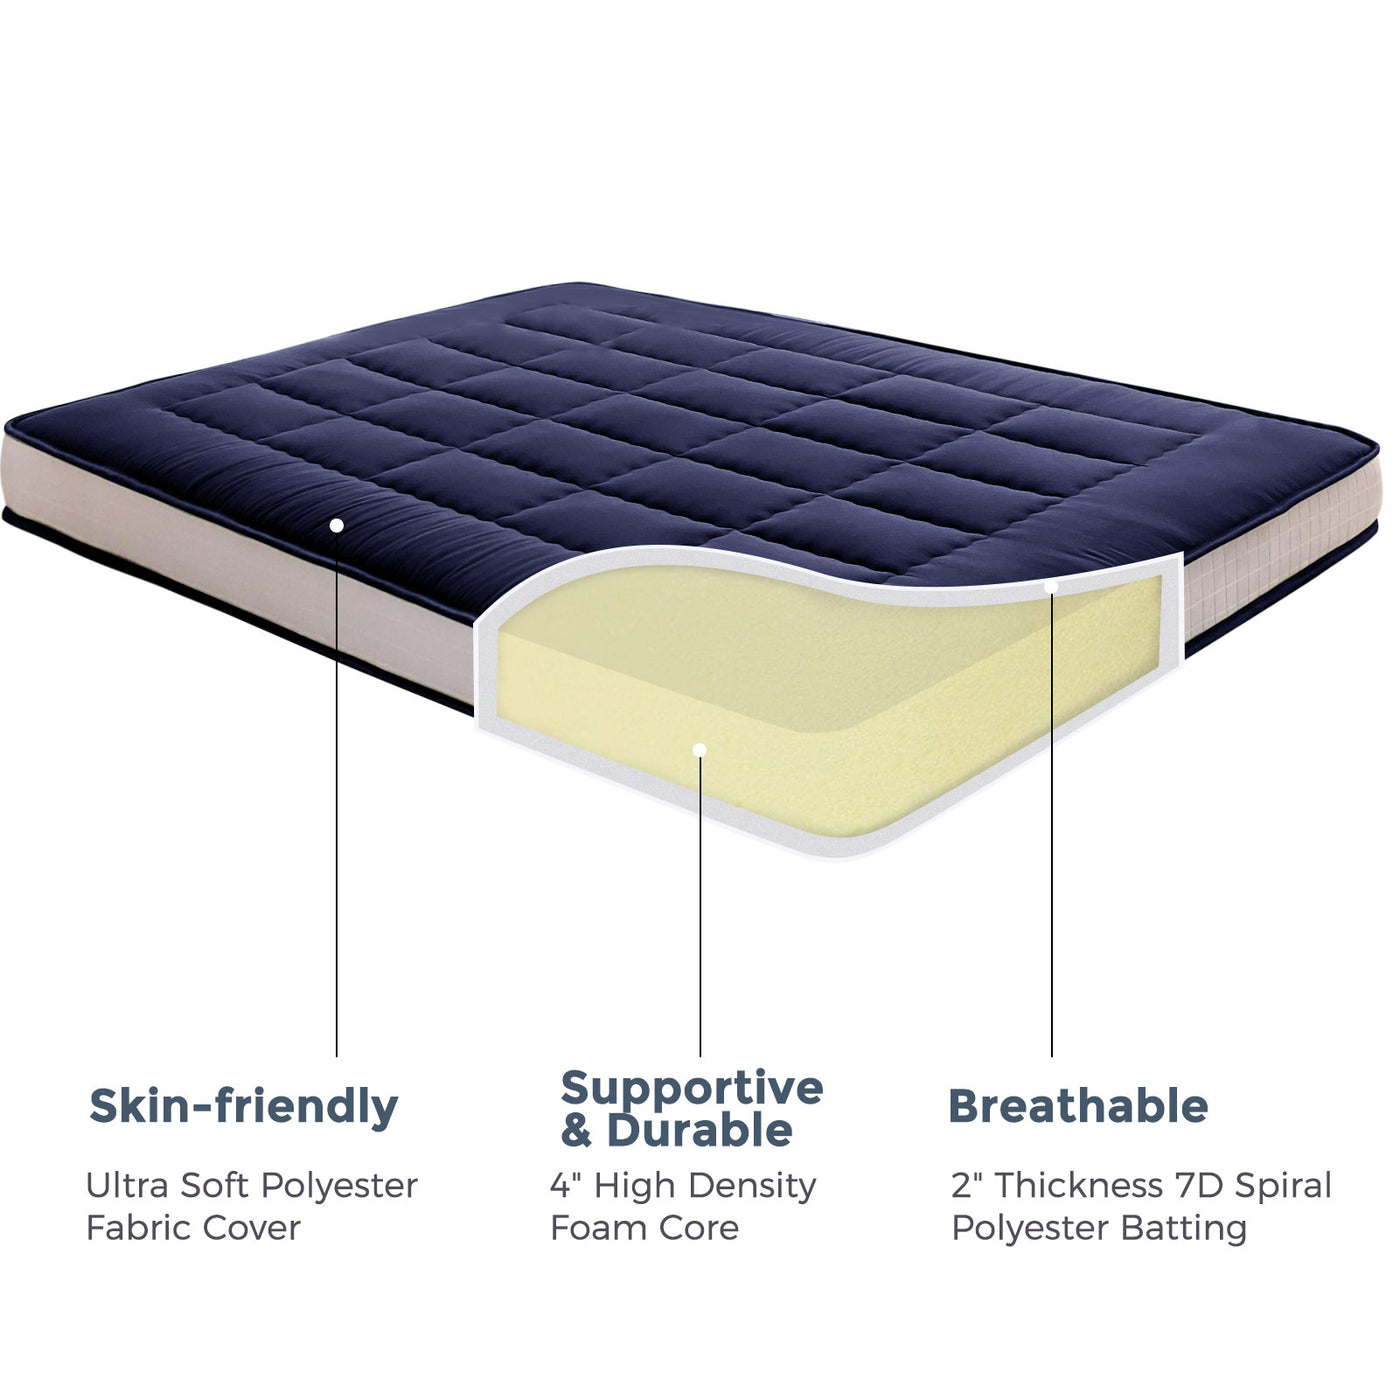 MAXYOYO 6" Extra Thick Japanese Futon Mattress with Rectangle Quilted, Stylish Floor Bed For Family, Navy